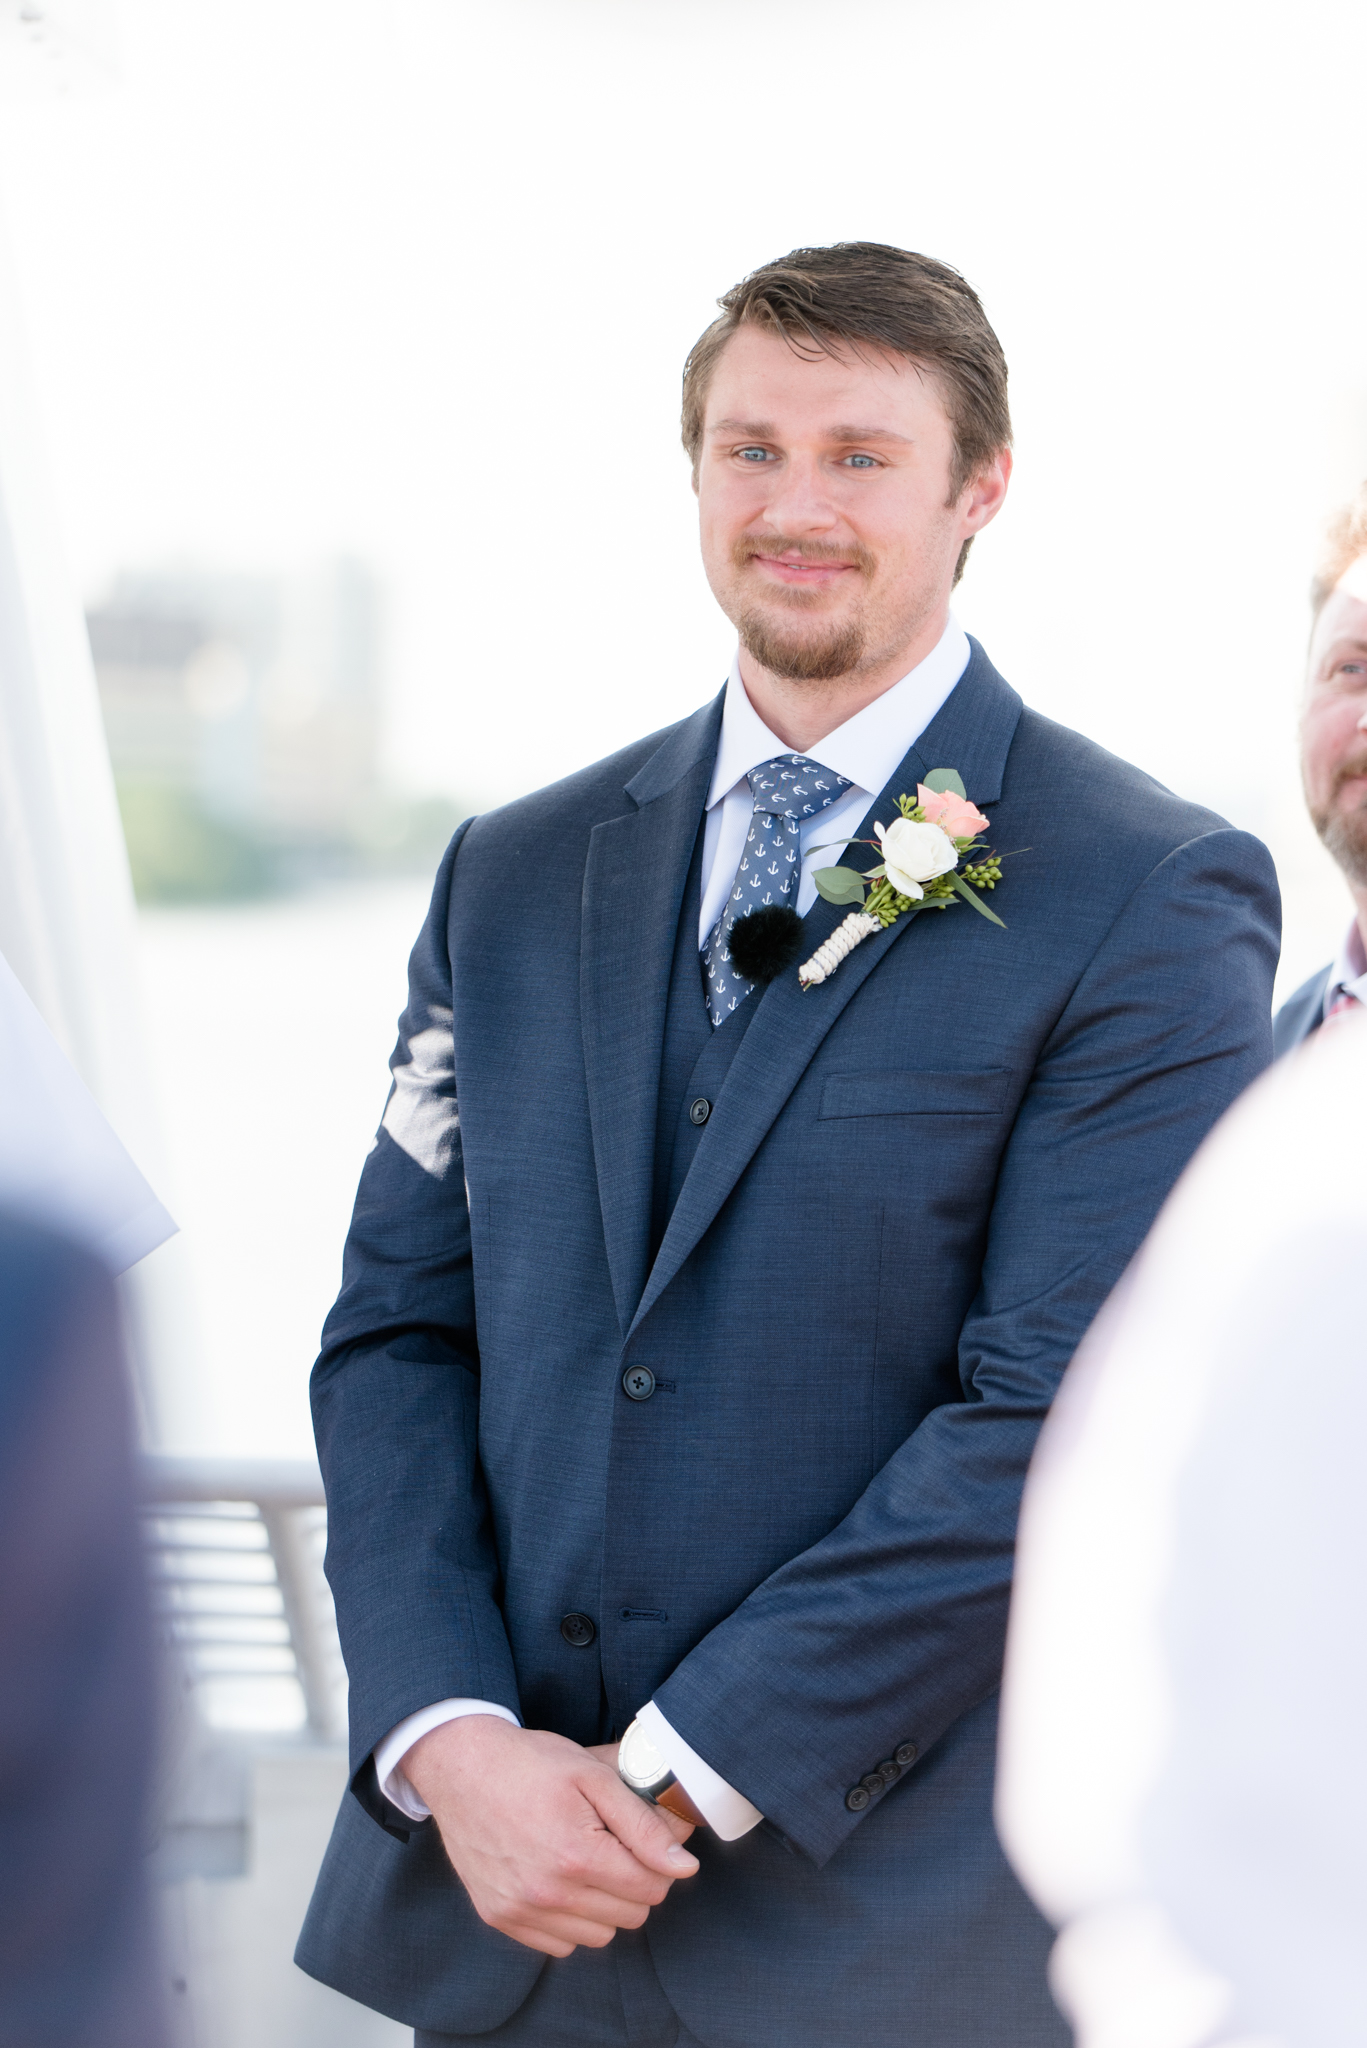 Groom looks at bride during ceremony.